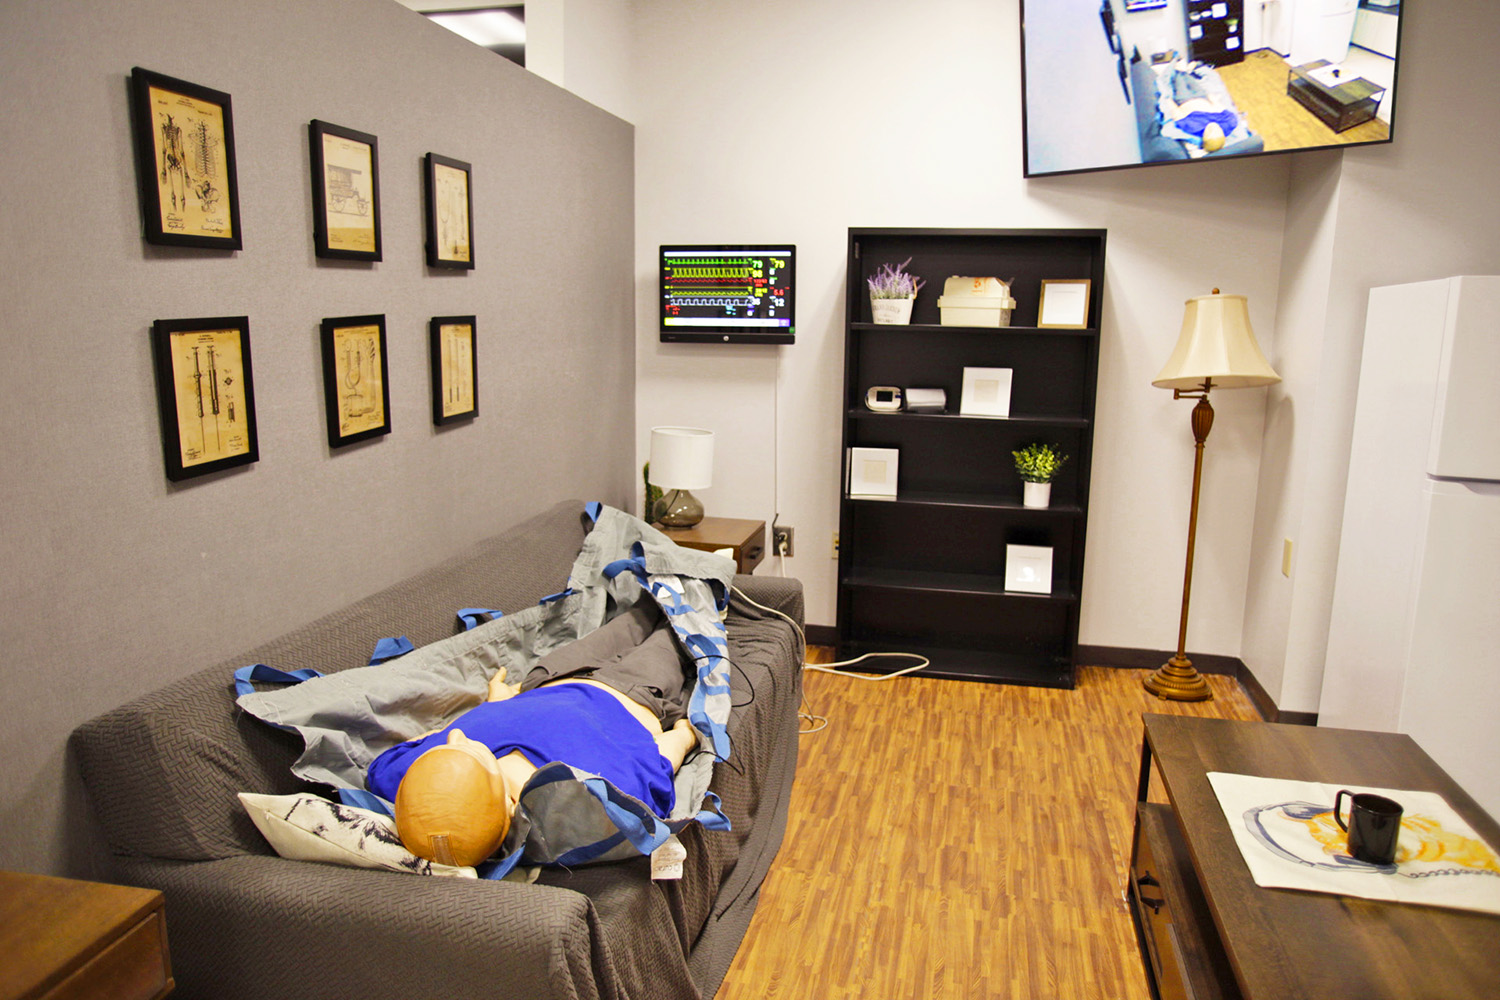 High fidelity medical mannequin lies prone on a sofa in the living room of the Emergency Medical Services simulation suite. The mannequin’s medical symptoms are controlled by instructors in an adjacent control room. Vital signs are displayed on the computer monitor on the far wall and images captured by a PTZ camera in the room appear on the 55” flat panel display in the upper corner of the far wall.